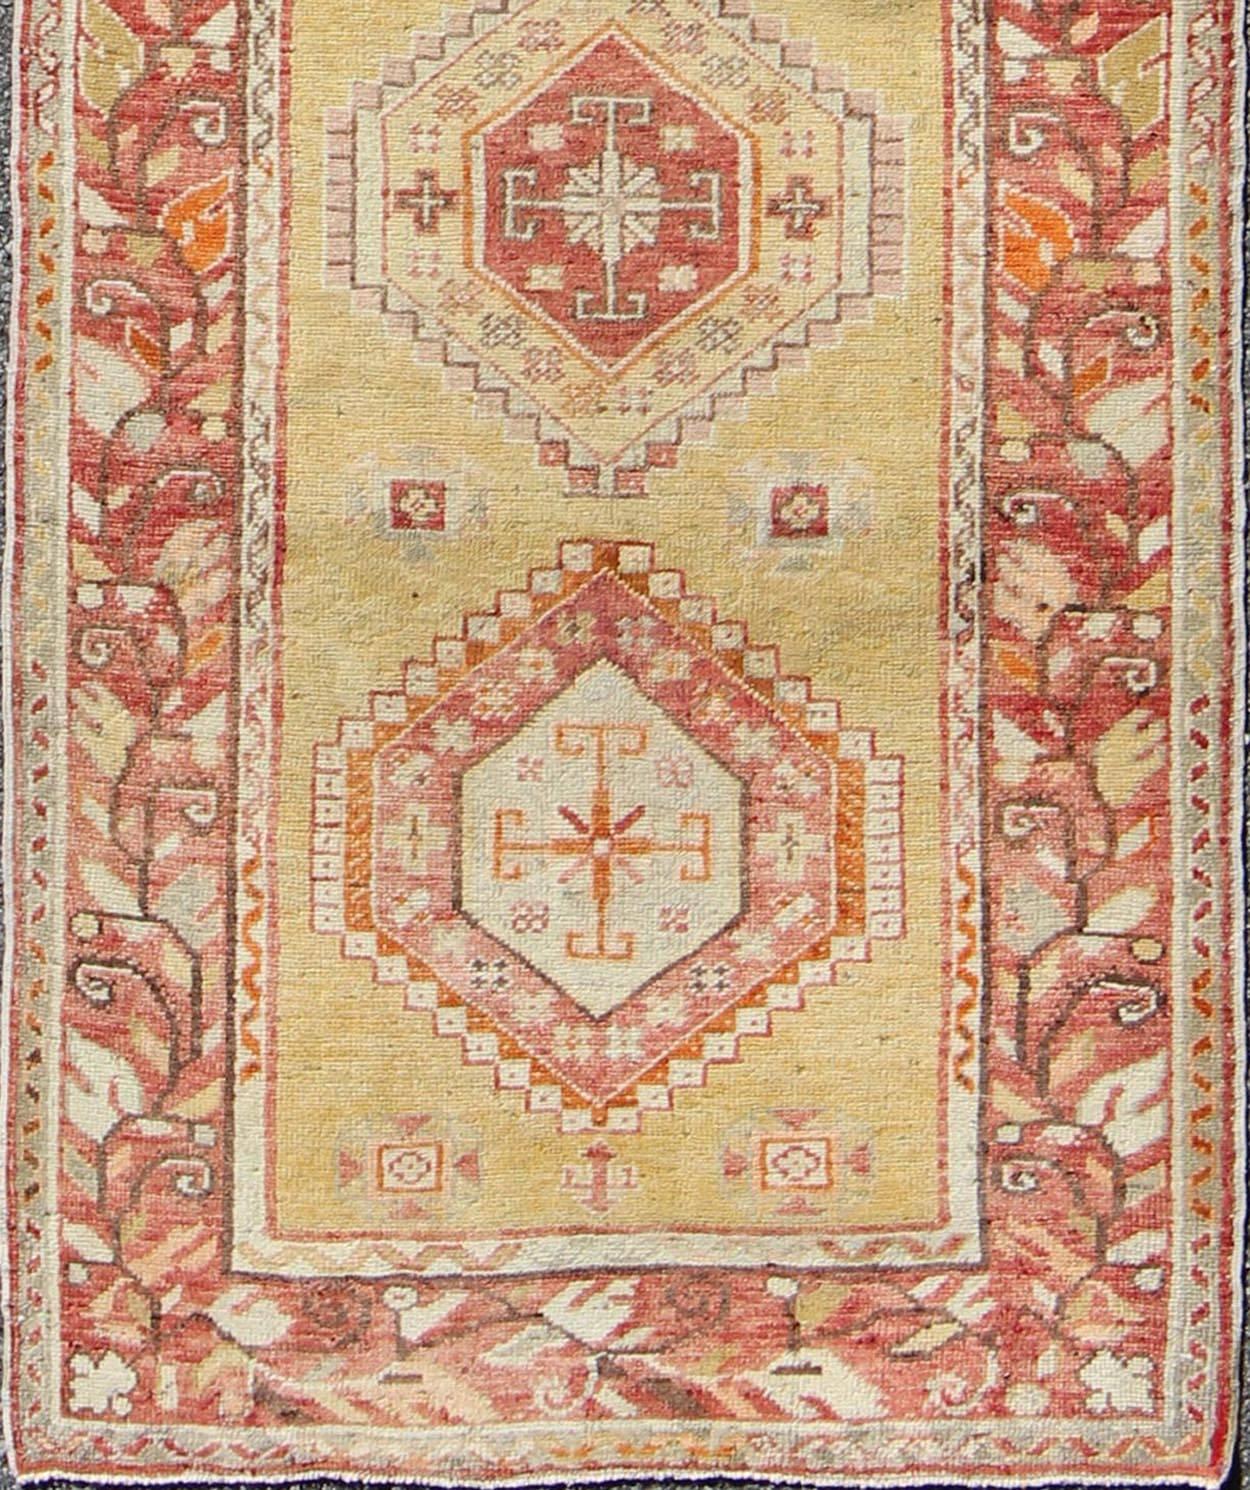 Turkish Oushak Runner with Geometric Medallions in Yellow Background Terracotta Border
This magnificent antique Turkish Oushak displays a glorious coloration paired with superlative geometric design. The delightful hues of yellow, coral, ivory and